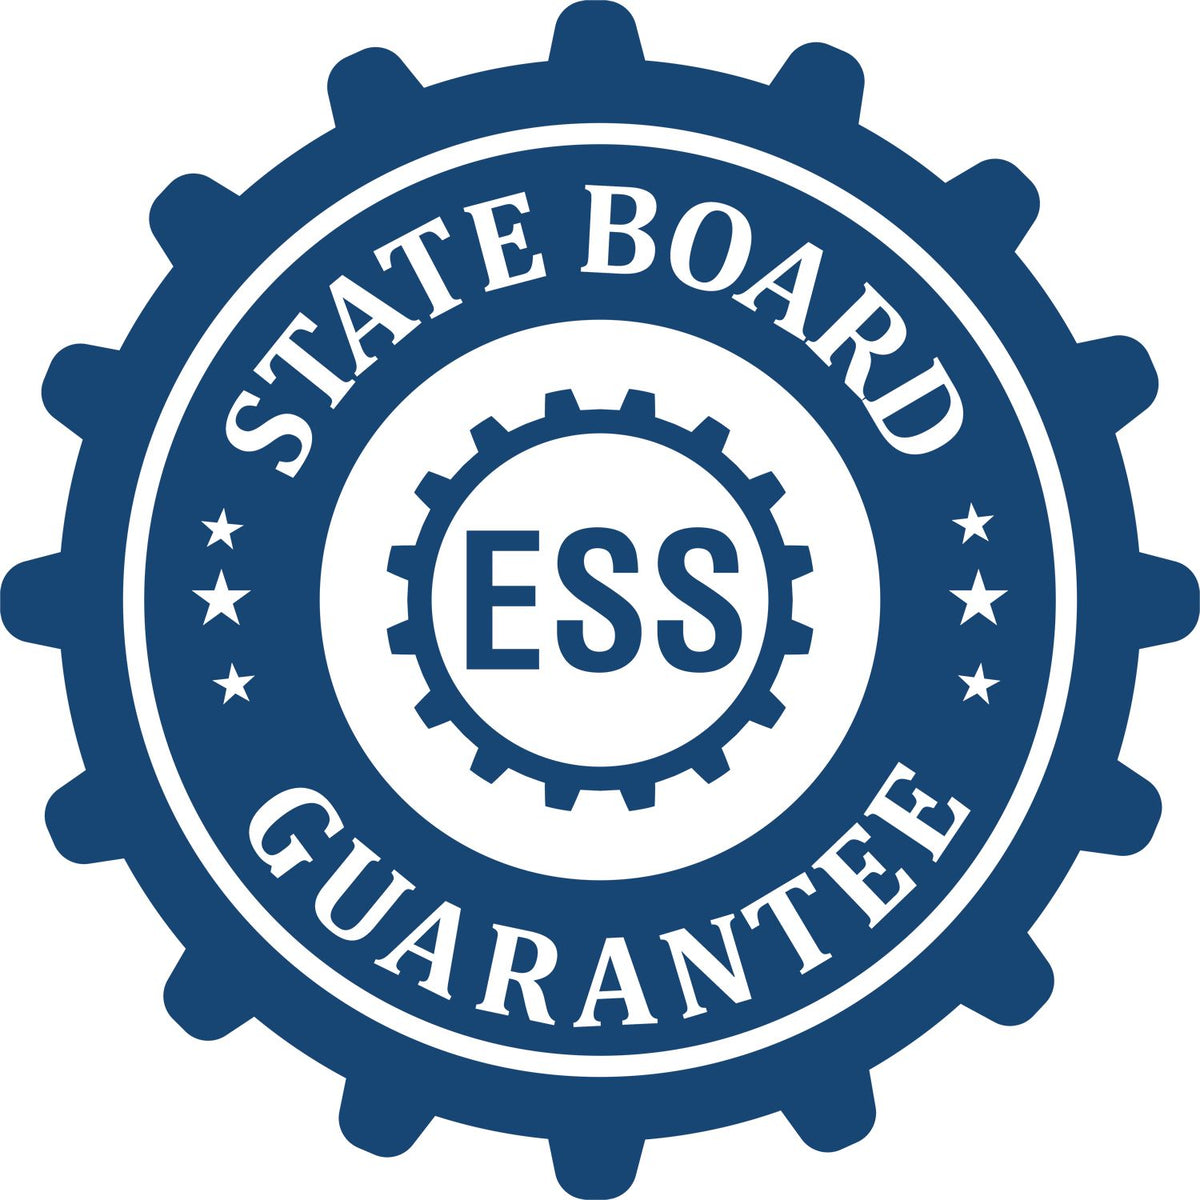 An emblem in a gear shape illustrating a state board guarantee for the Heavy Duty Cast Iron Washington Engineer Seal Embosser product.